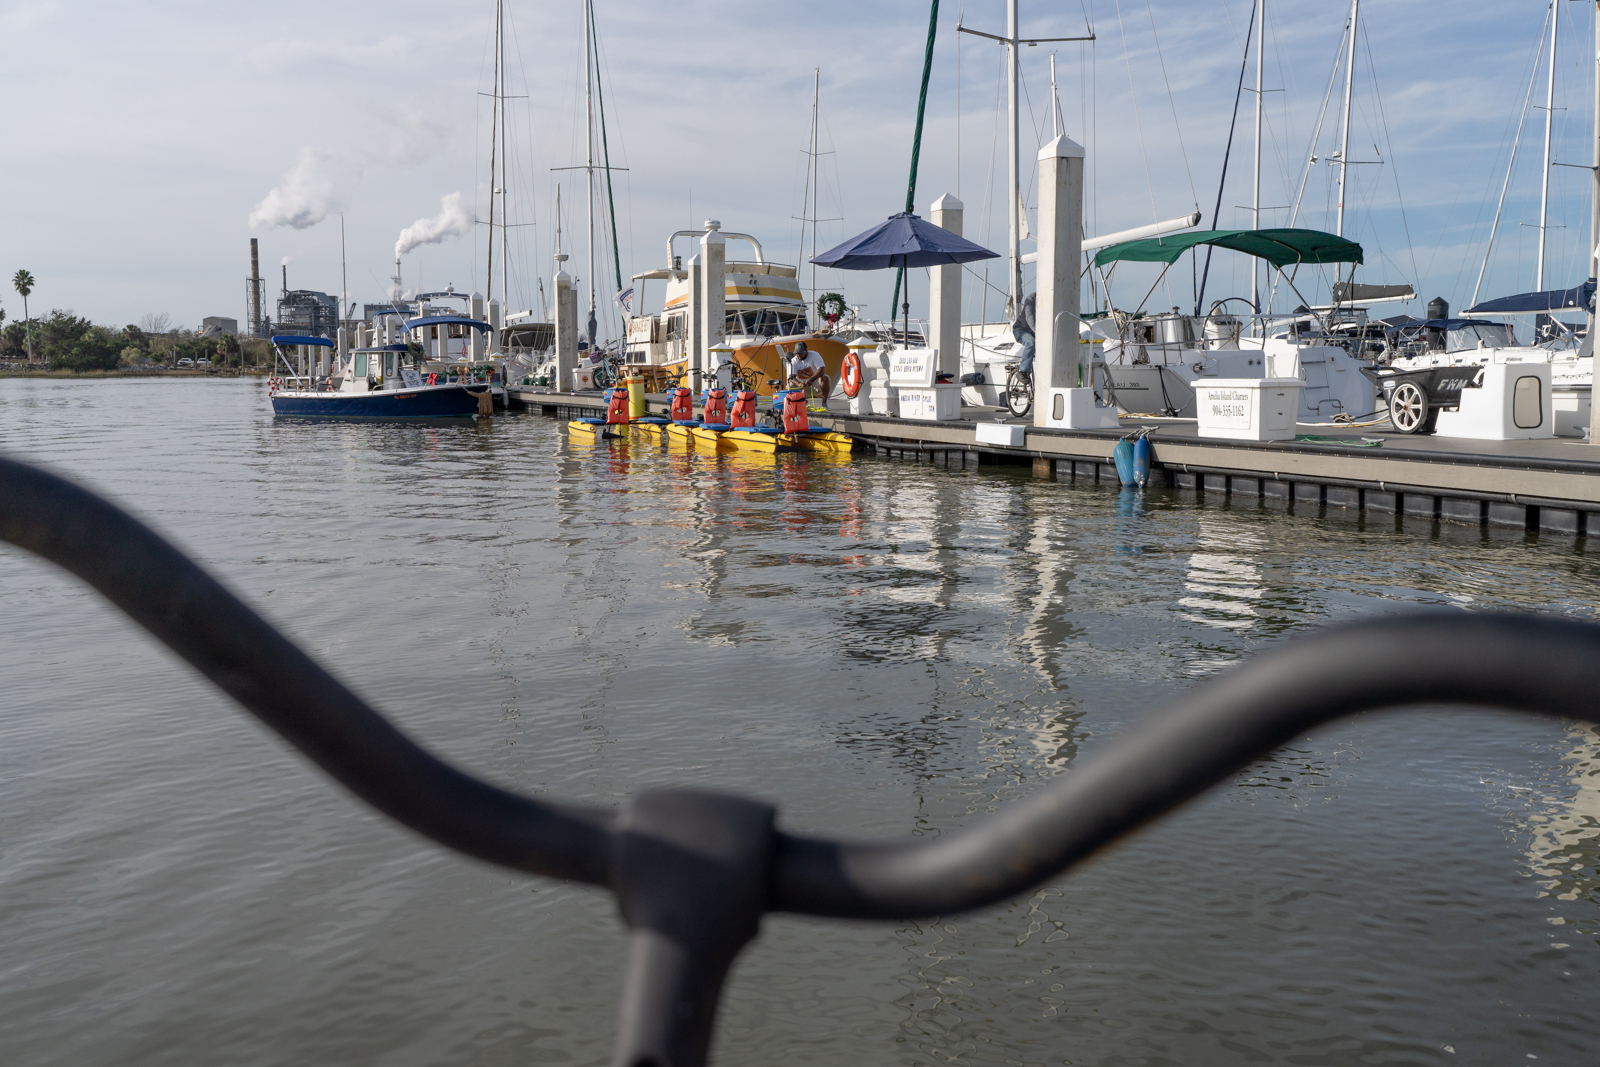 The black handlebars of a River Cycle is blurred out in the foreground. Between the handlebars is a sharp photo of dark water and a dock with nice boats and a blue umbrella, a dock, and four yellow boats with orange life jackets tied to them. A man crouches down next to them. 